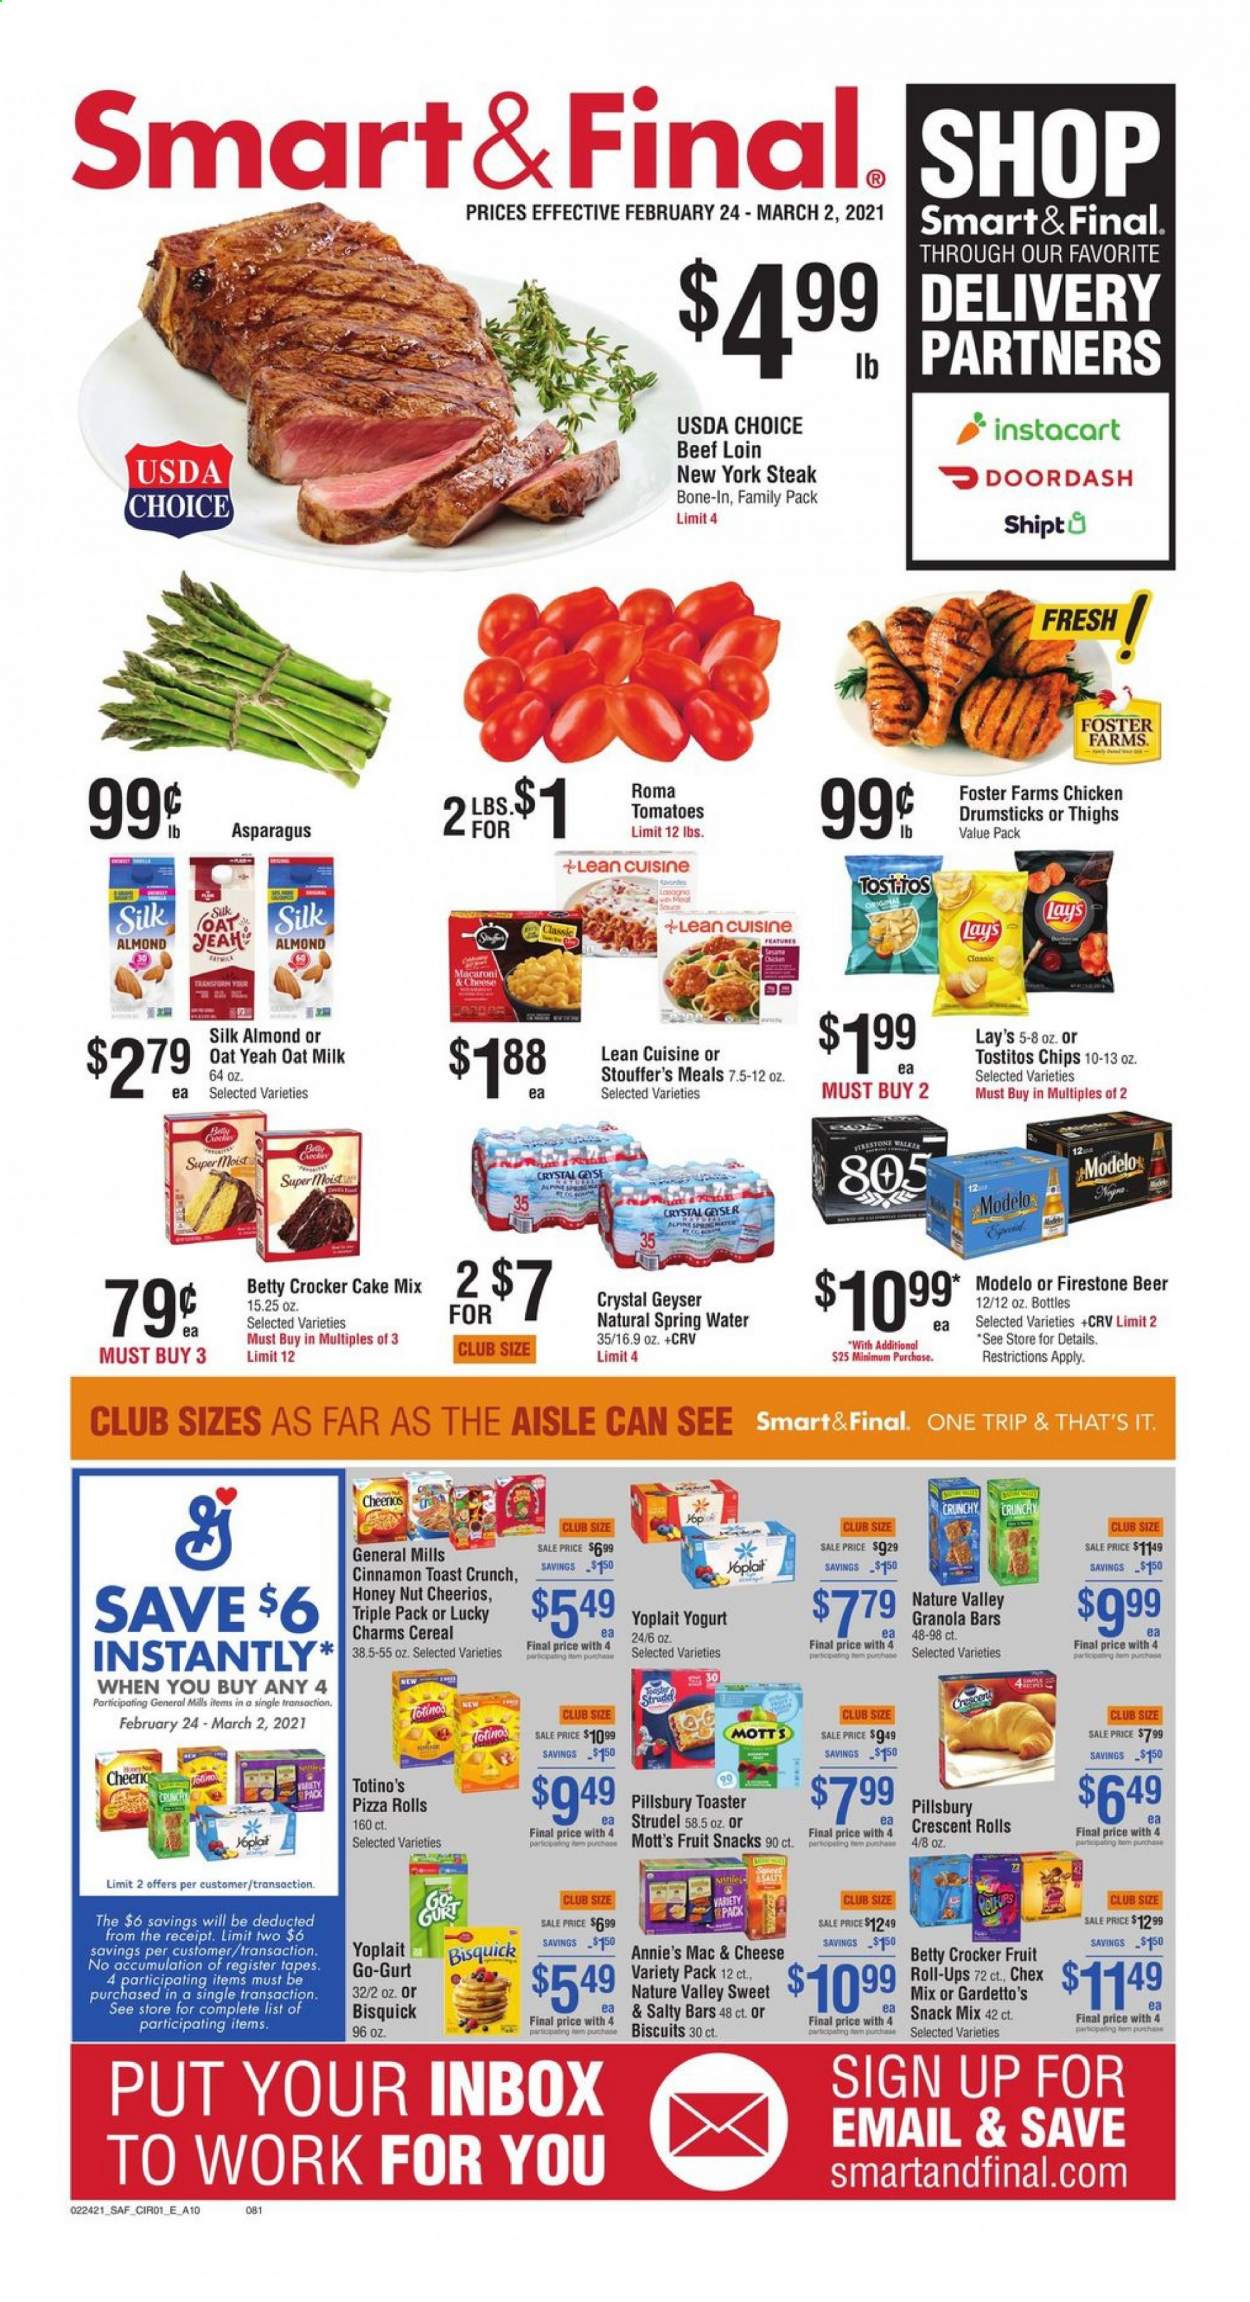 thumbnail - Smart & Final Flyer - 02/24/2021 - 03/02/2021 - Sales products - pizza rolls, toast bread, cake mix, crescent rolls, strudel, macaroni & cheese, pizza, Pillsbury, Lean Cuisine, Annie's, yoghurt, Yoplait, milk, oat milk, Stouffer's, biscuit, fruit snack, chips, Lay’s, Tostitos, Chex Mix, Bisquick, cereals, Cheerios, granola bar, Nature Valley, cinnamon, Mott's, spring water, beer, Modelo, steak. Page 1.